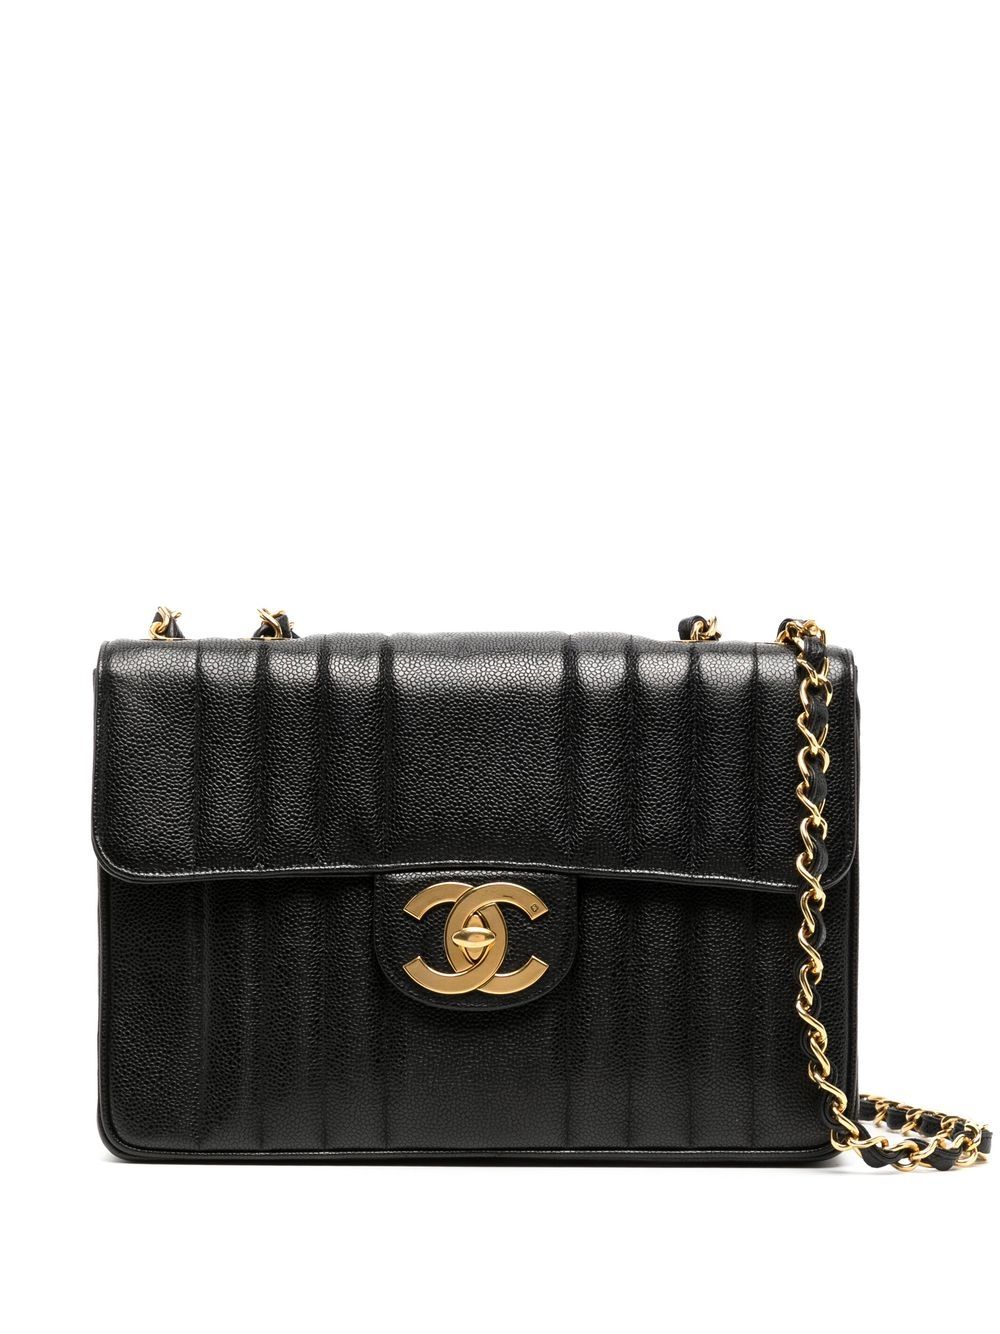 CHANEL Pre-Owned 1992 Mademoiselle Classic Flap shoulder bag